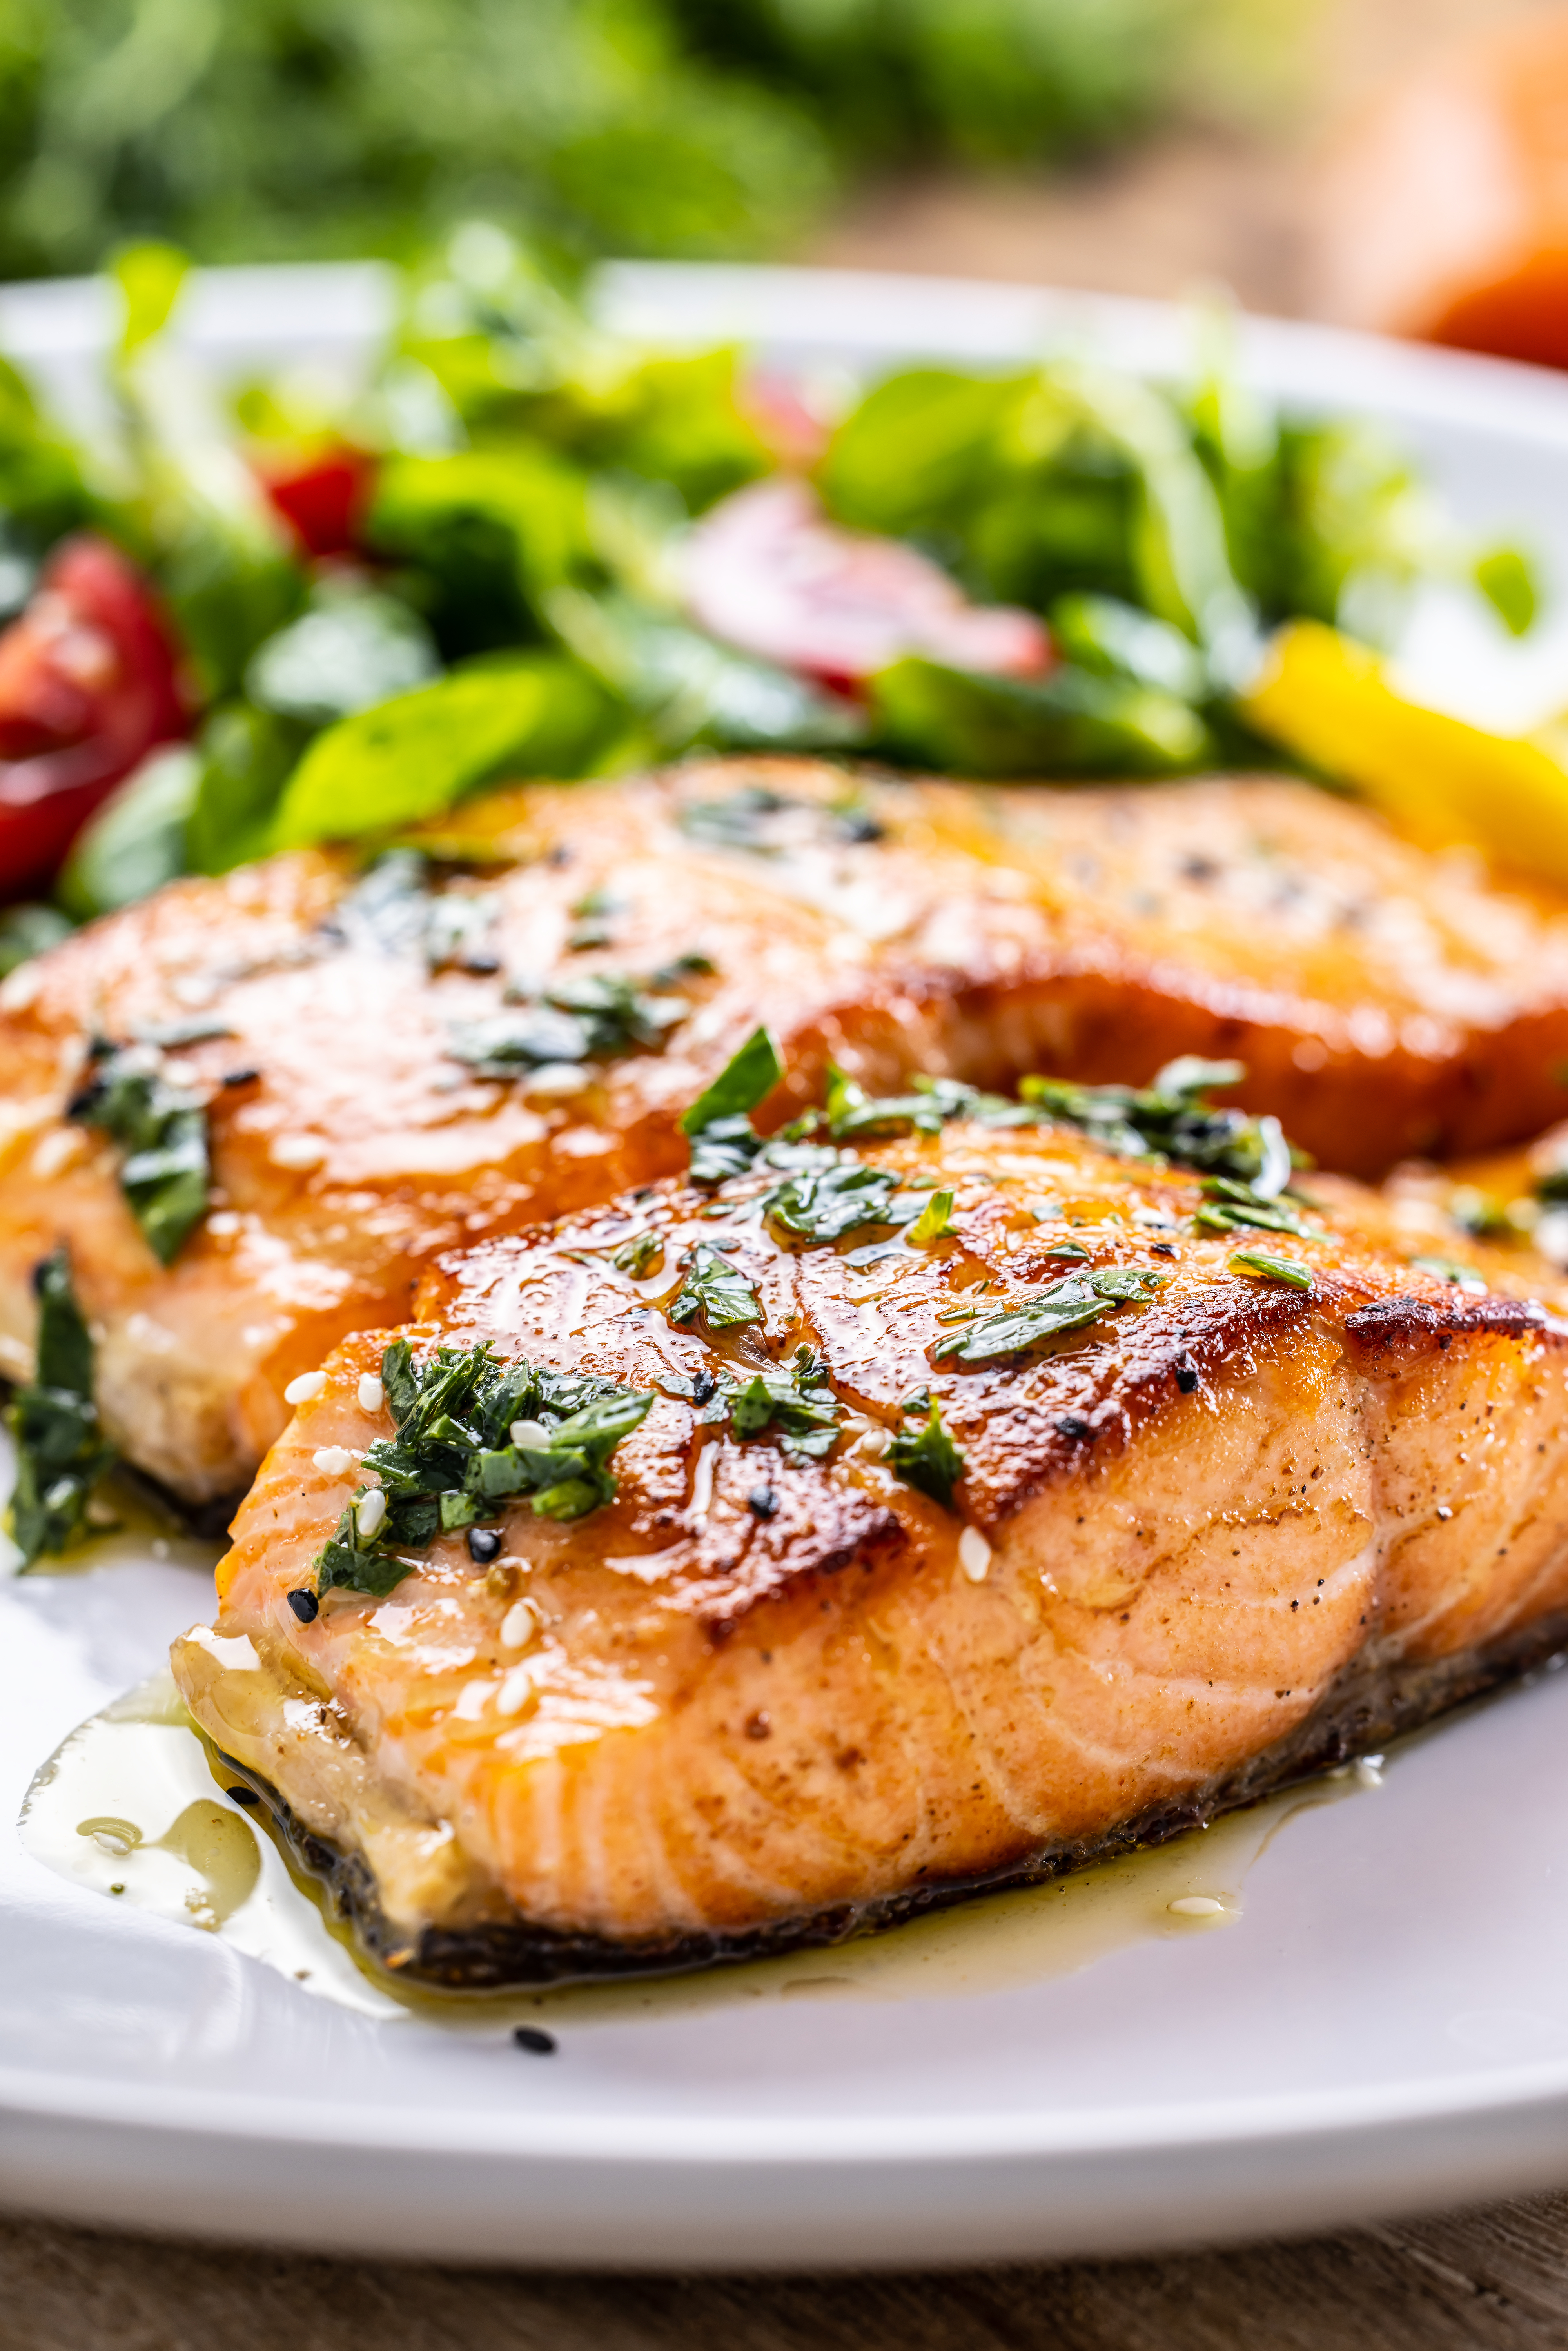 Grilled salmon fillets on a plate with a side salad